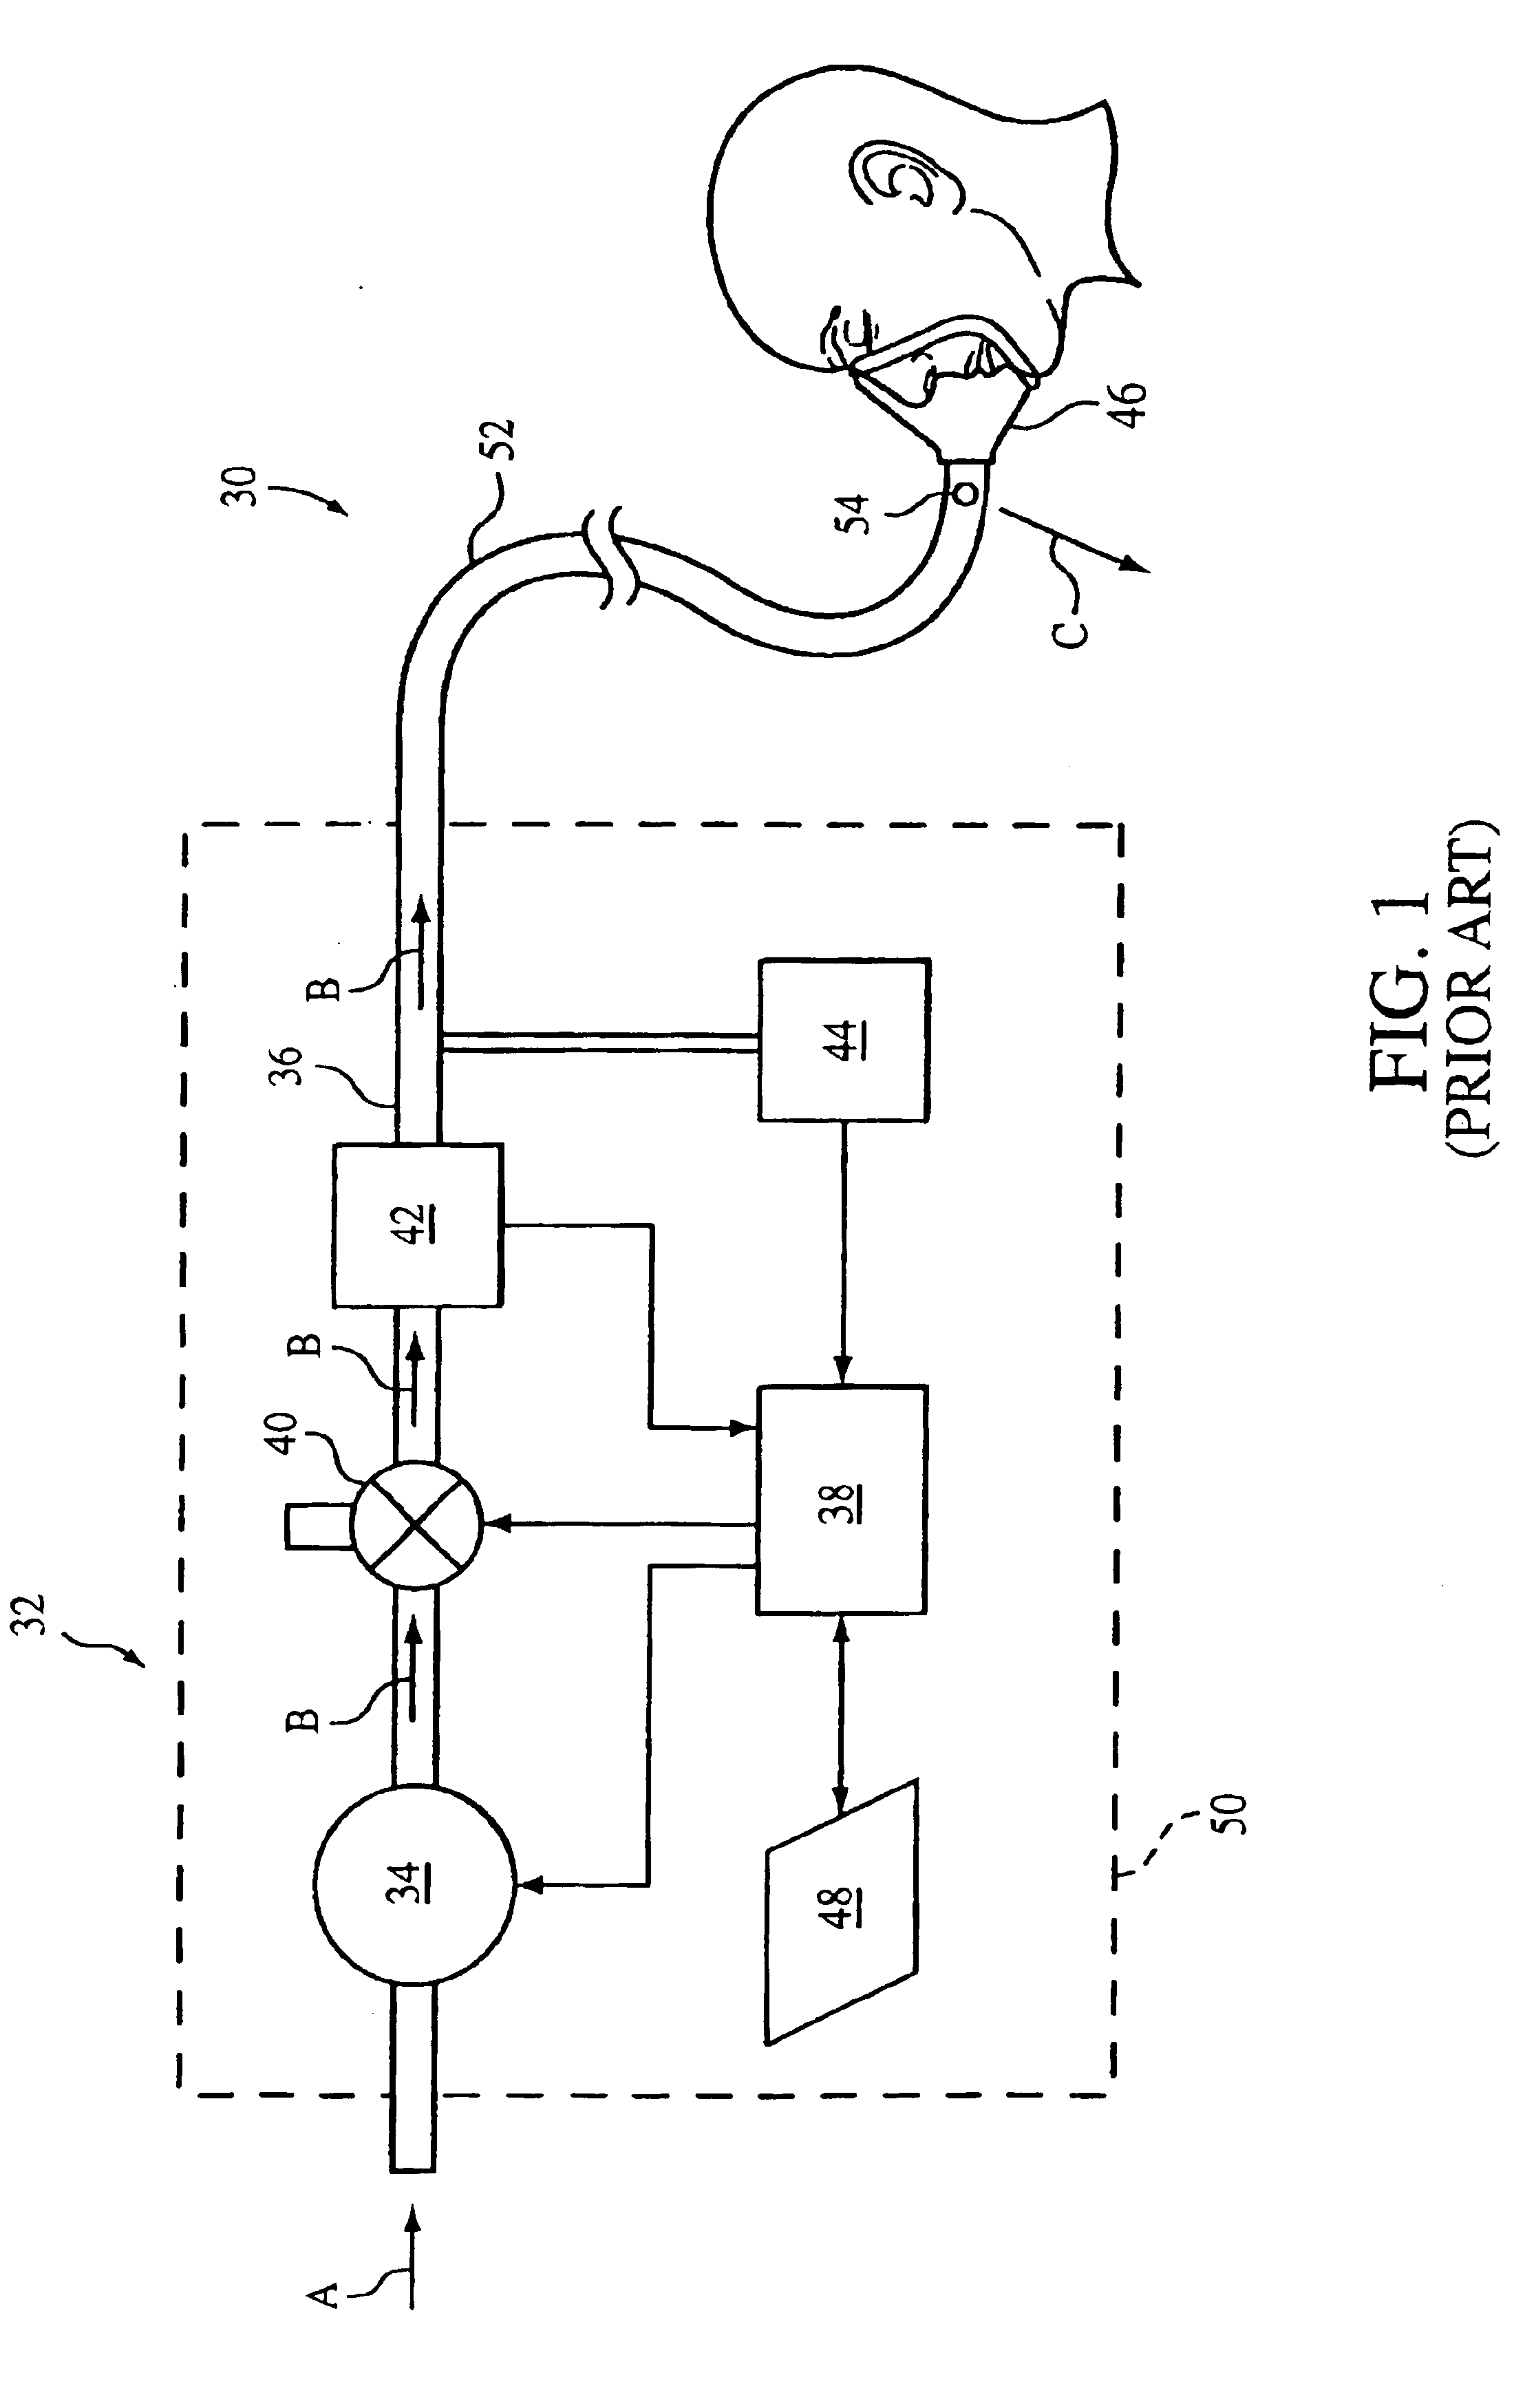 Exhaust port assembly for a pressure support system